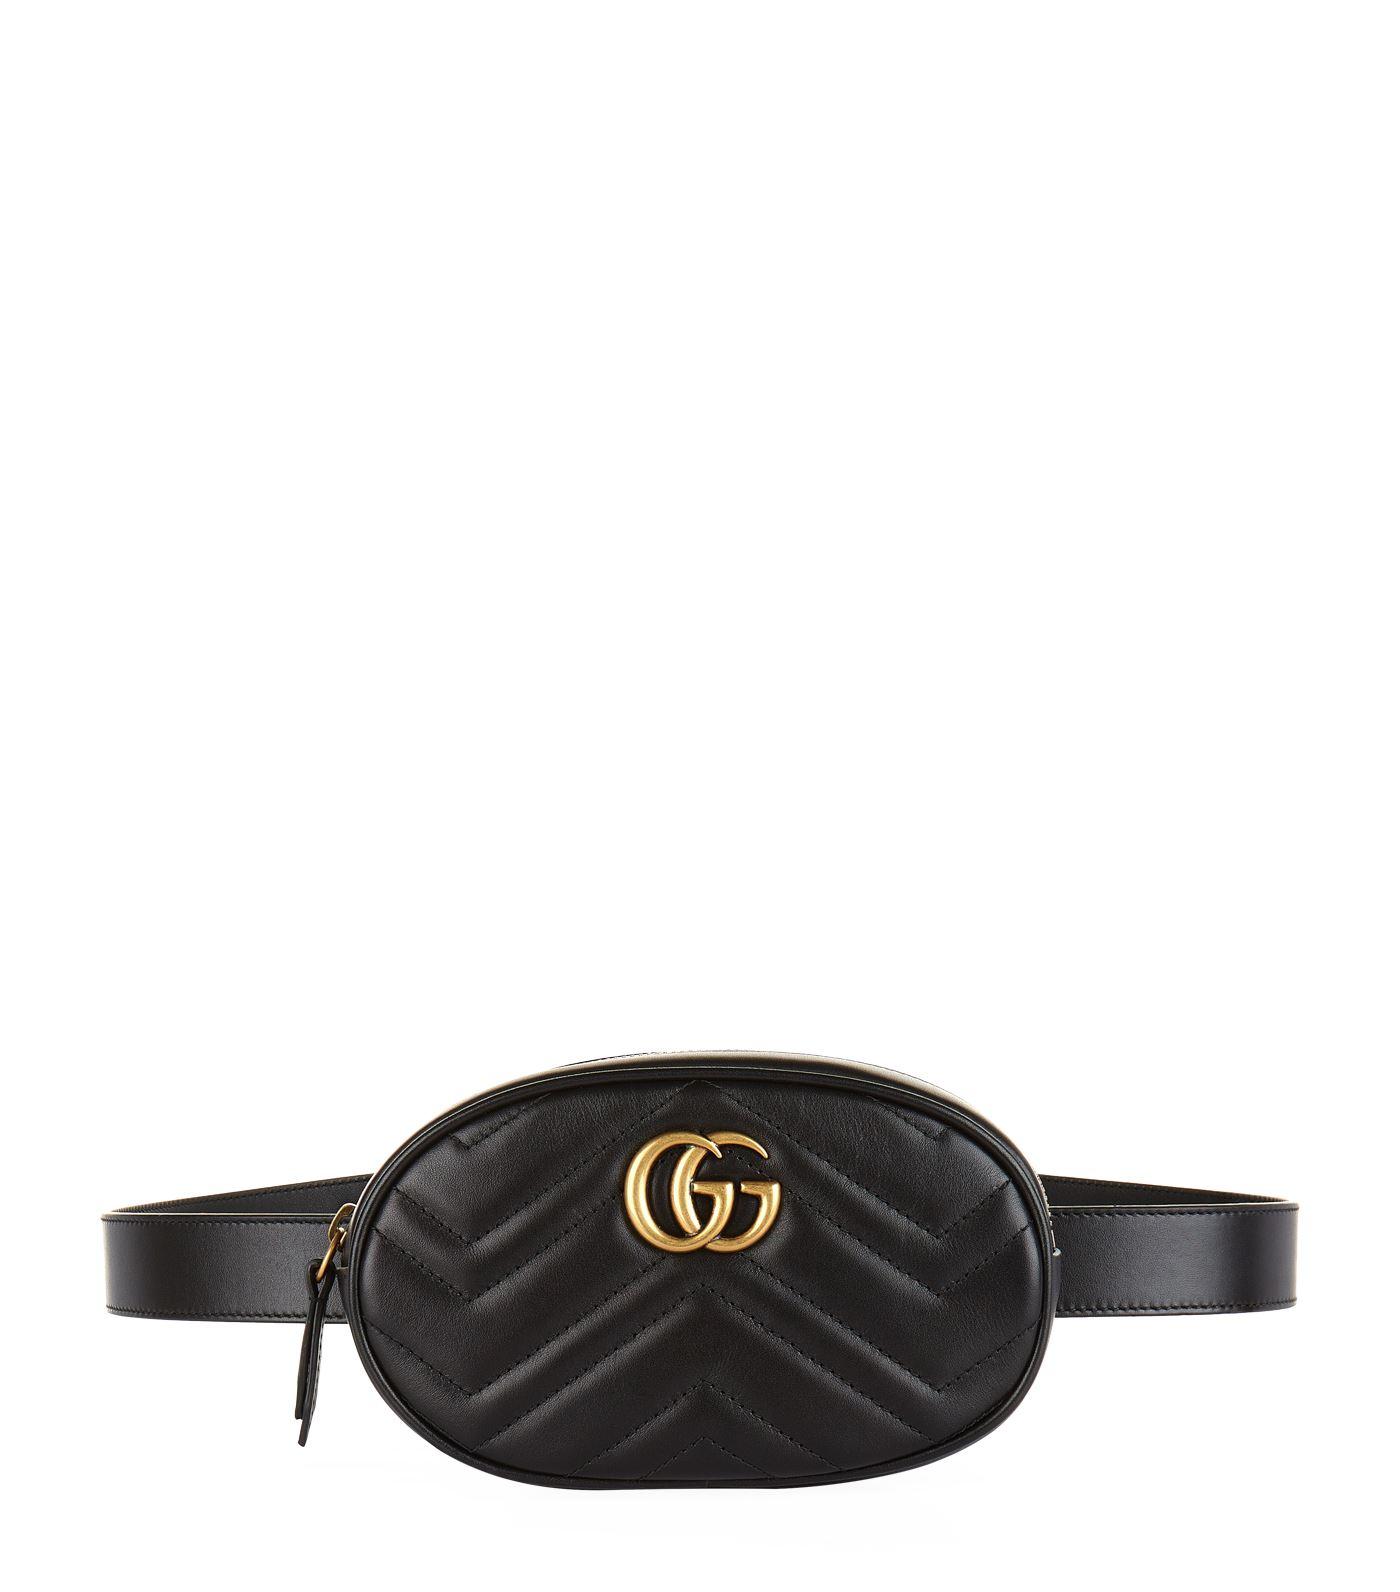 Gucci GG Marmont Leather Belt Bag in Nero (Black) - Save 32% - Lyst